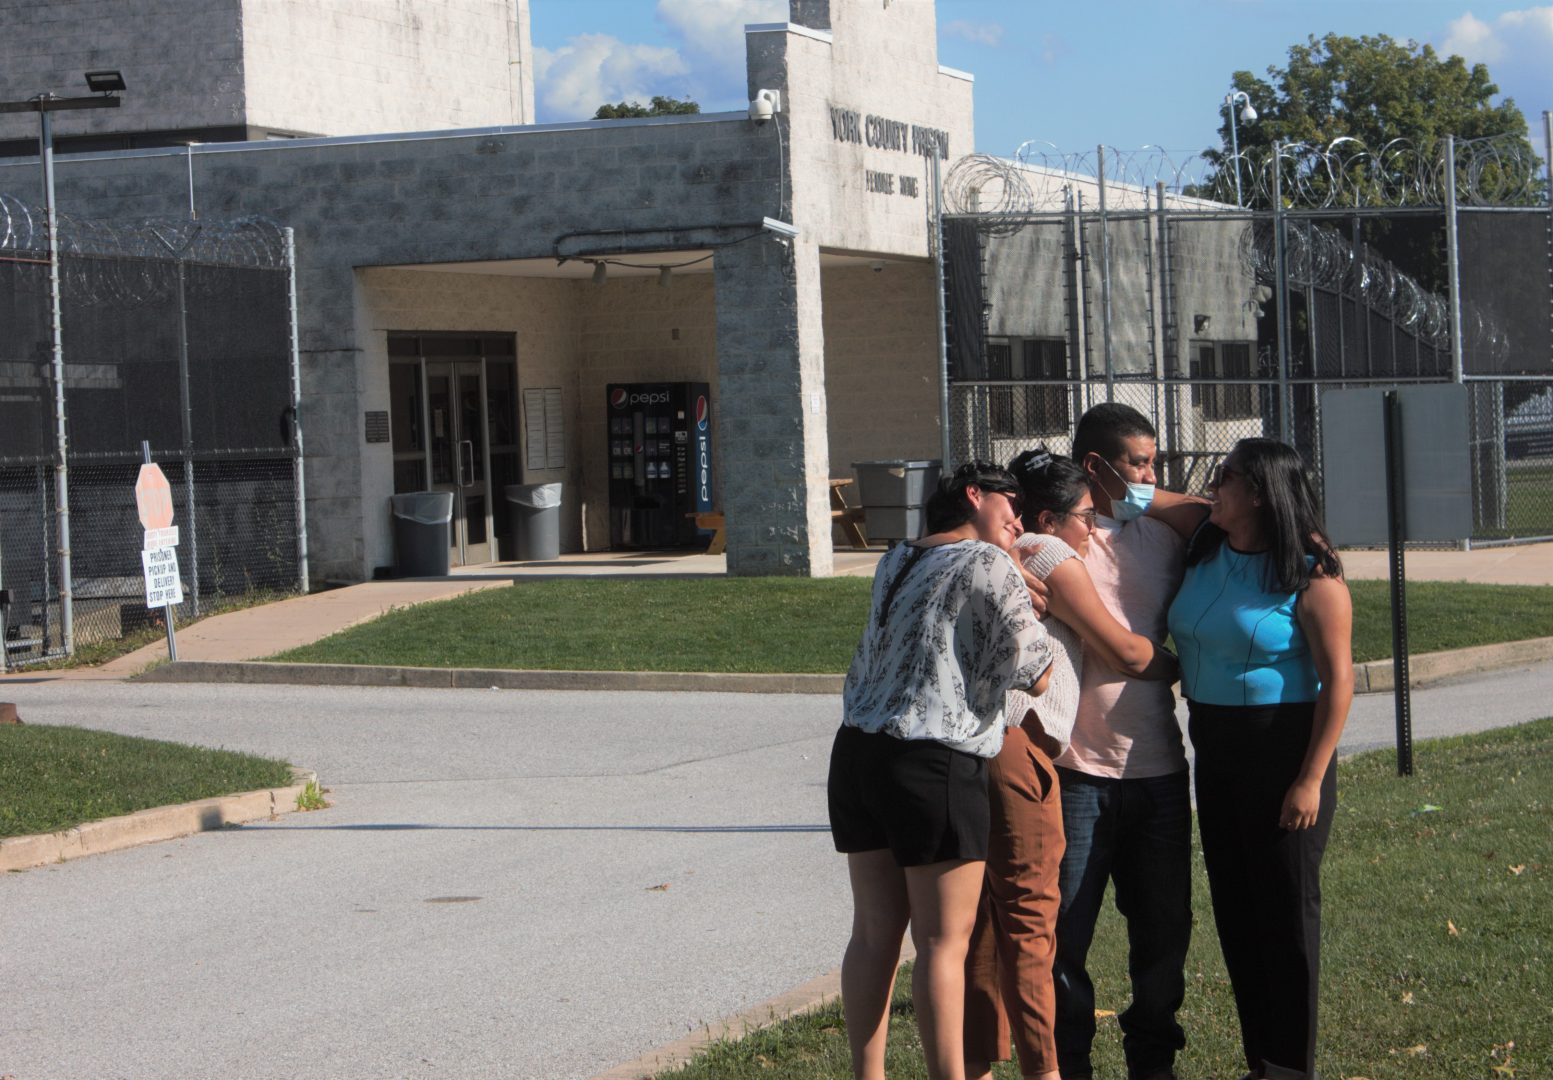 The Carmonas hug after Alfredo Carmona, an Immigrations and Customs Enforcement detainee at York County Prison, was released on humanitarian parole on Aug. 2. 